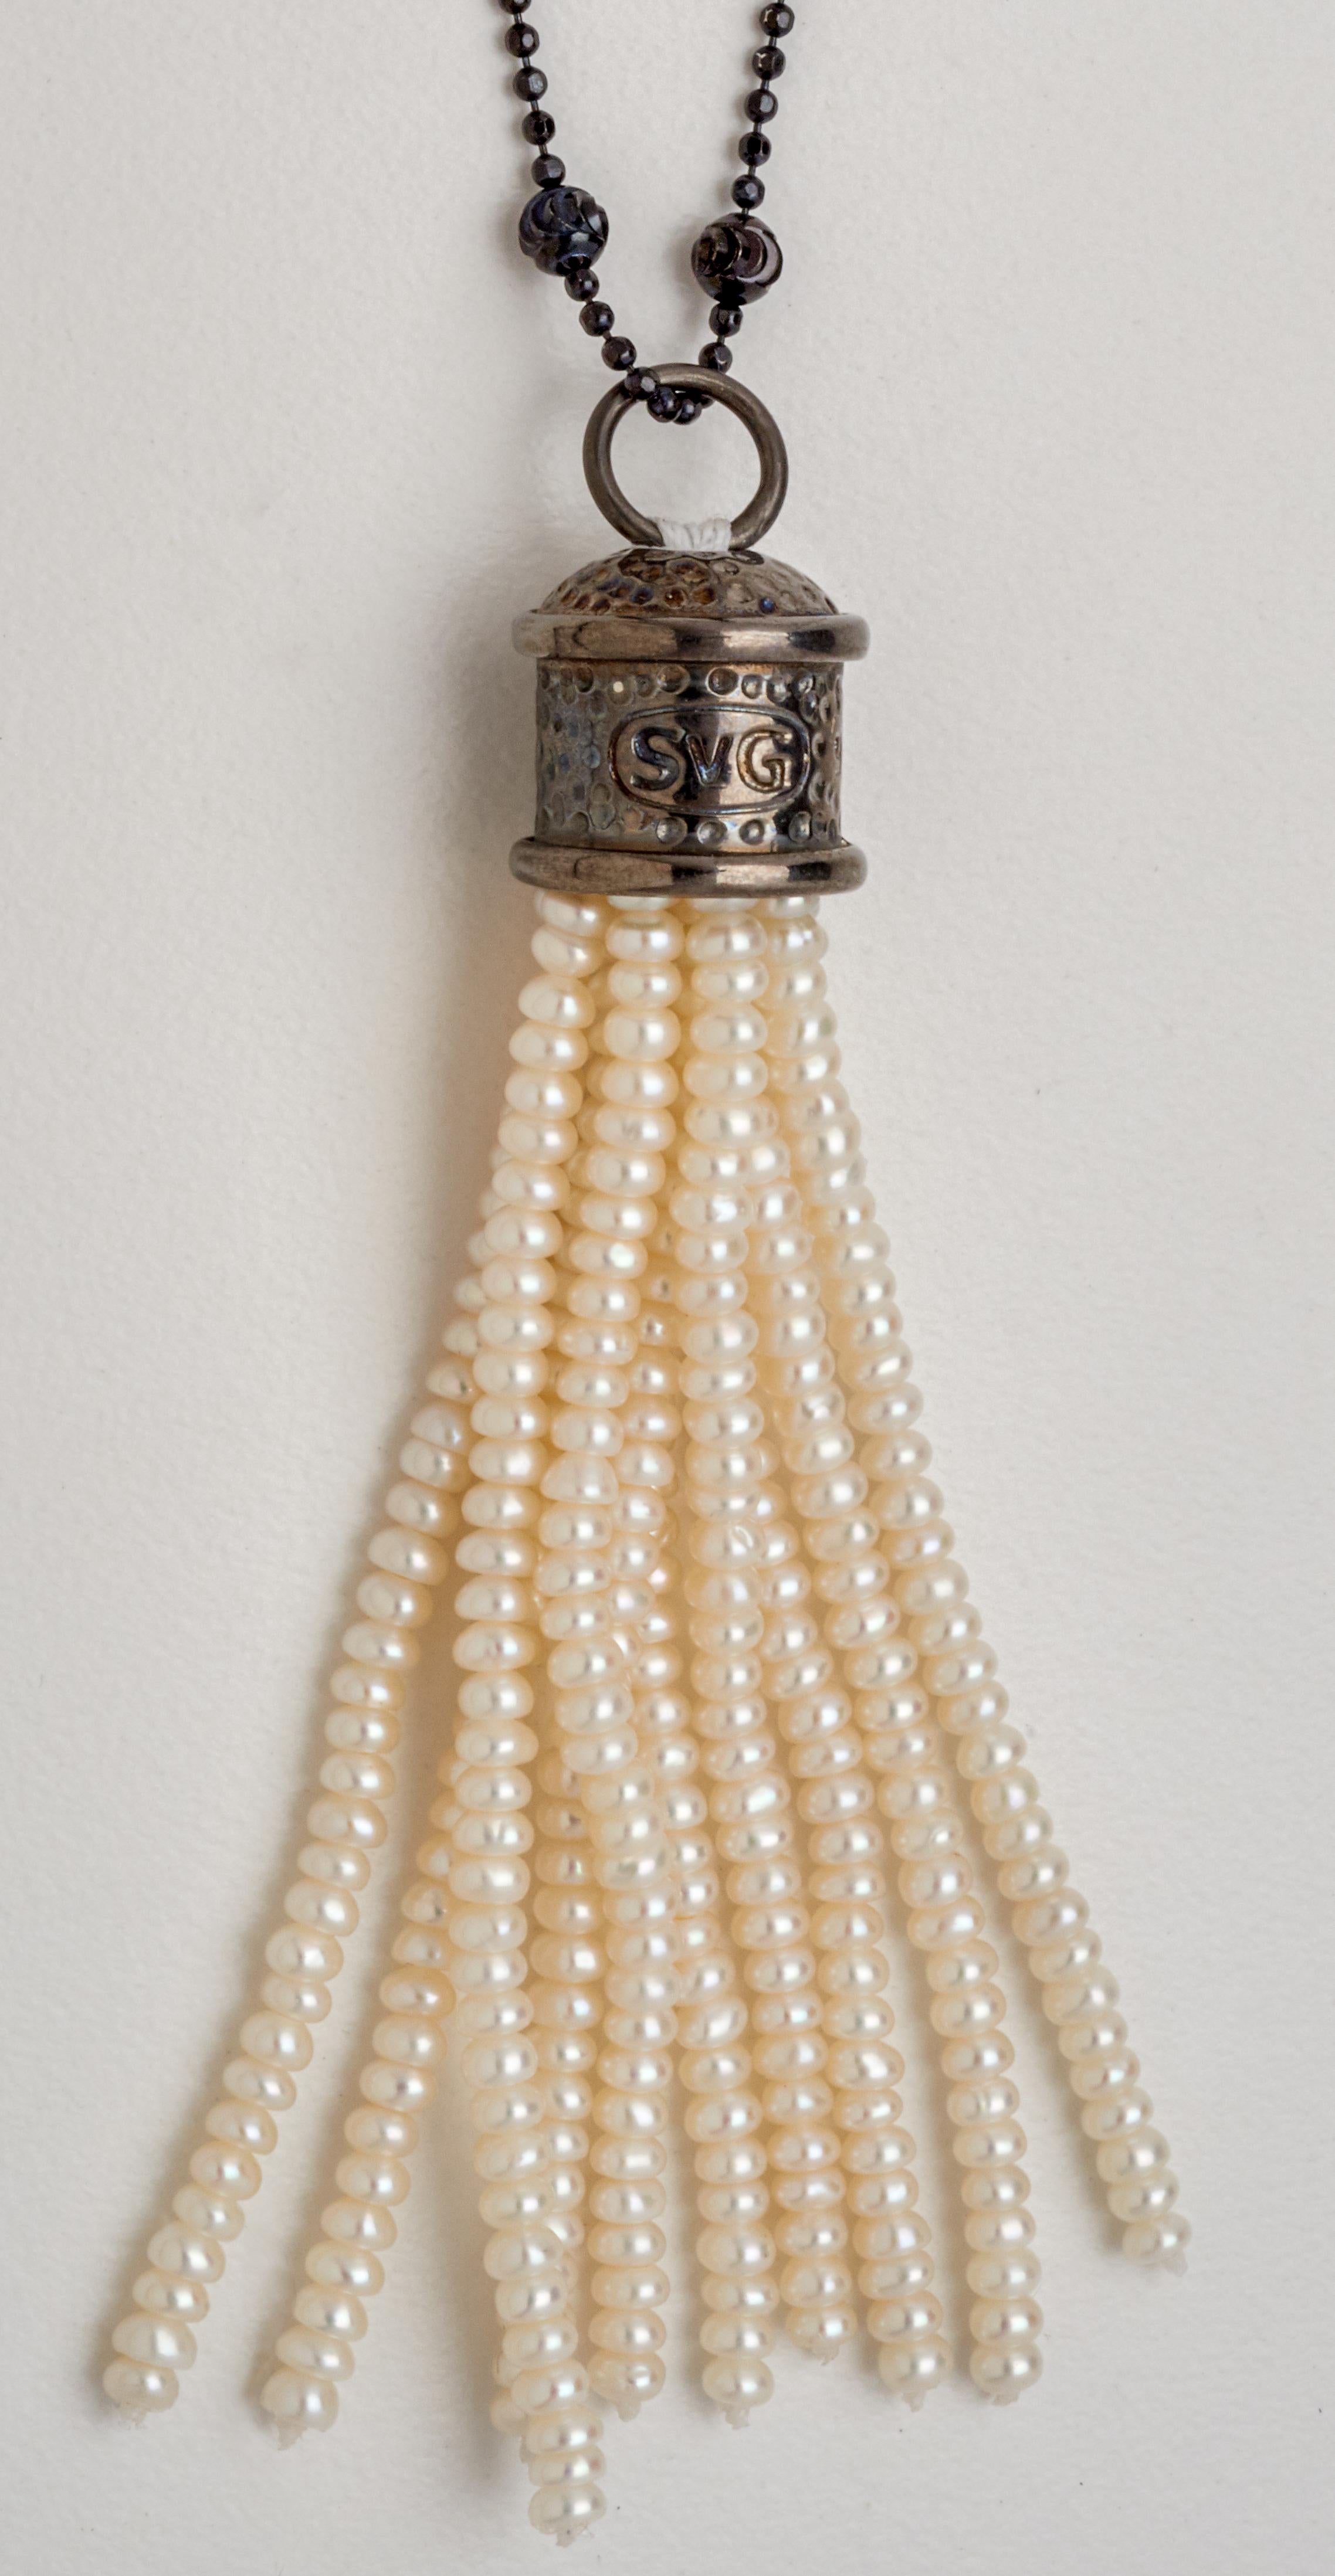 Versatile for daytime or evening wear, this contemporary pendant necklace is a constant for any jewelry collection. Crafted with a sterling silver tassel cap & over 350 hand strung 2-1/2 mm freshwater pearls. The feature pendant is displayed on an